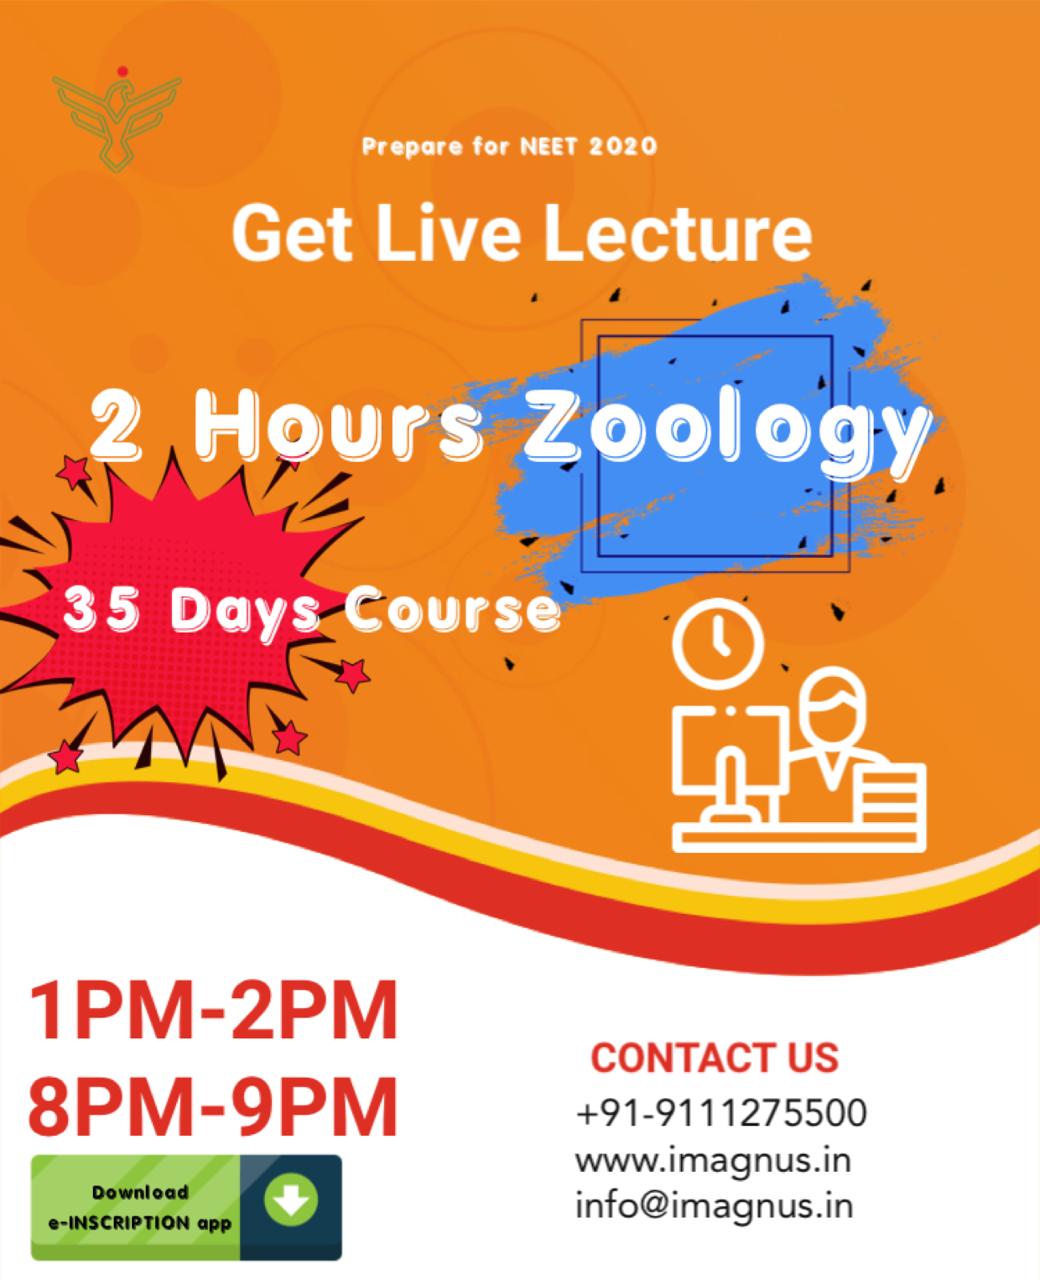 e-Inscription: Get Free live Lectures for NEET, Better Learning for Better Results.Â Â Education and LearningDistance Learning CoursesAll Indiaother